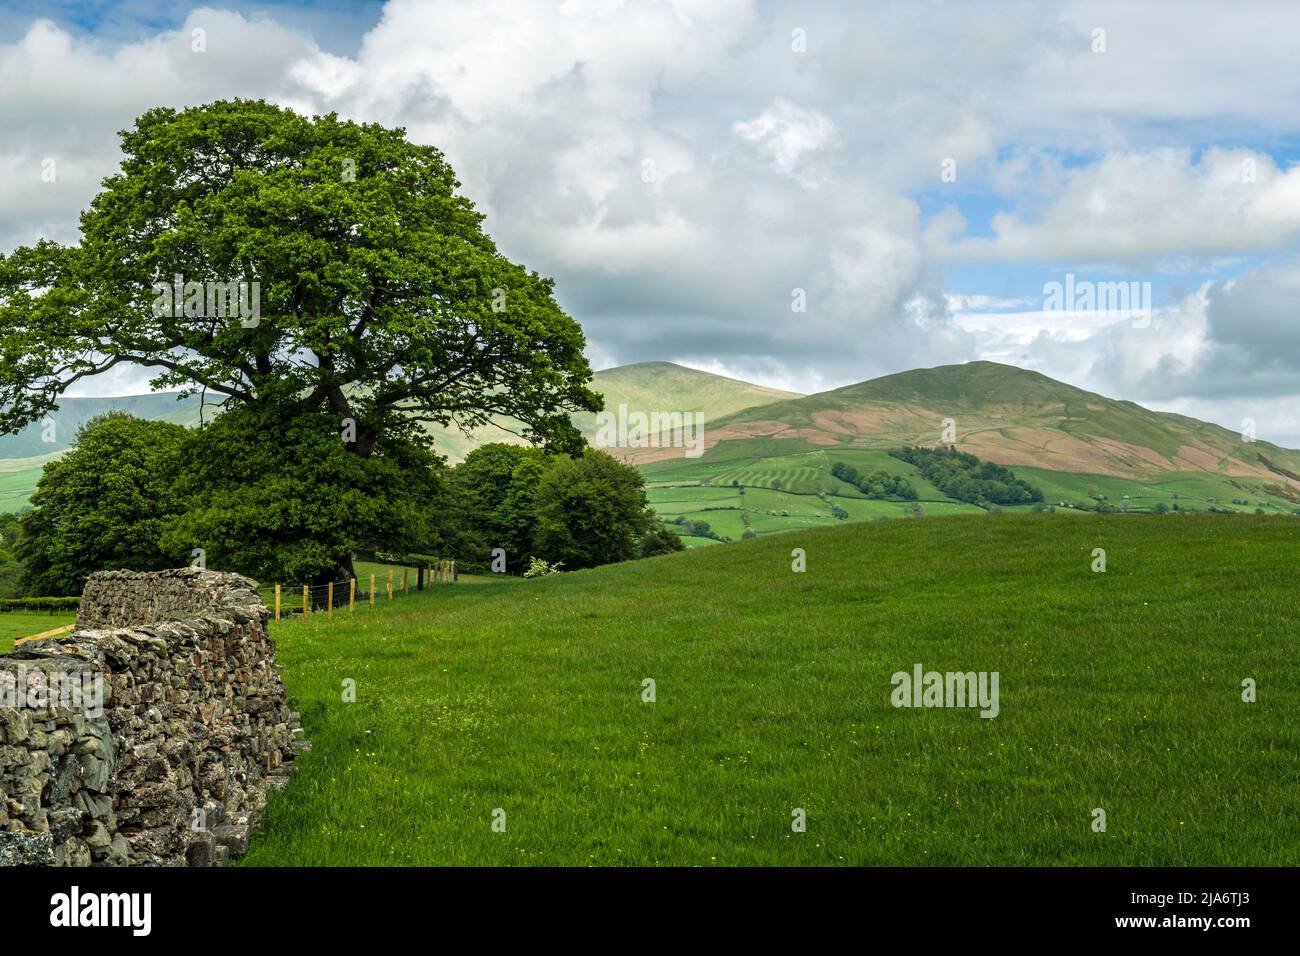 A view of Arant Haws and Winder, both fells in the Howgill Fells region - on a bright day near Sedbergh Stock Photo